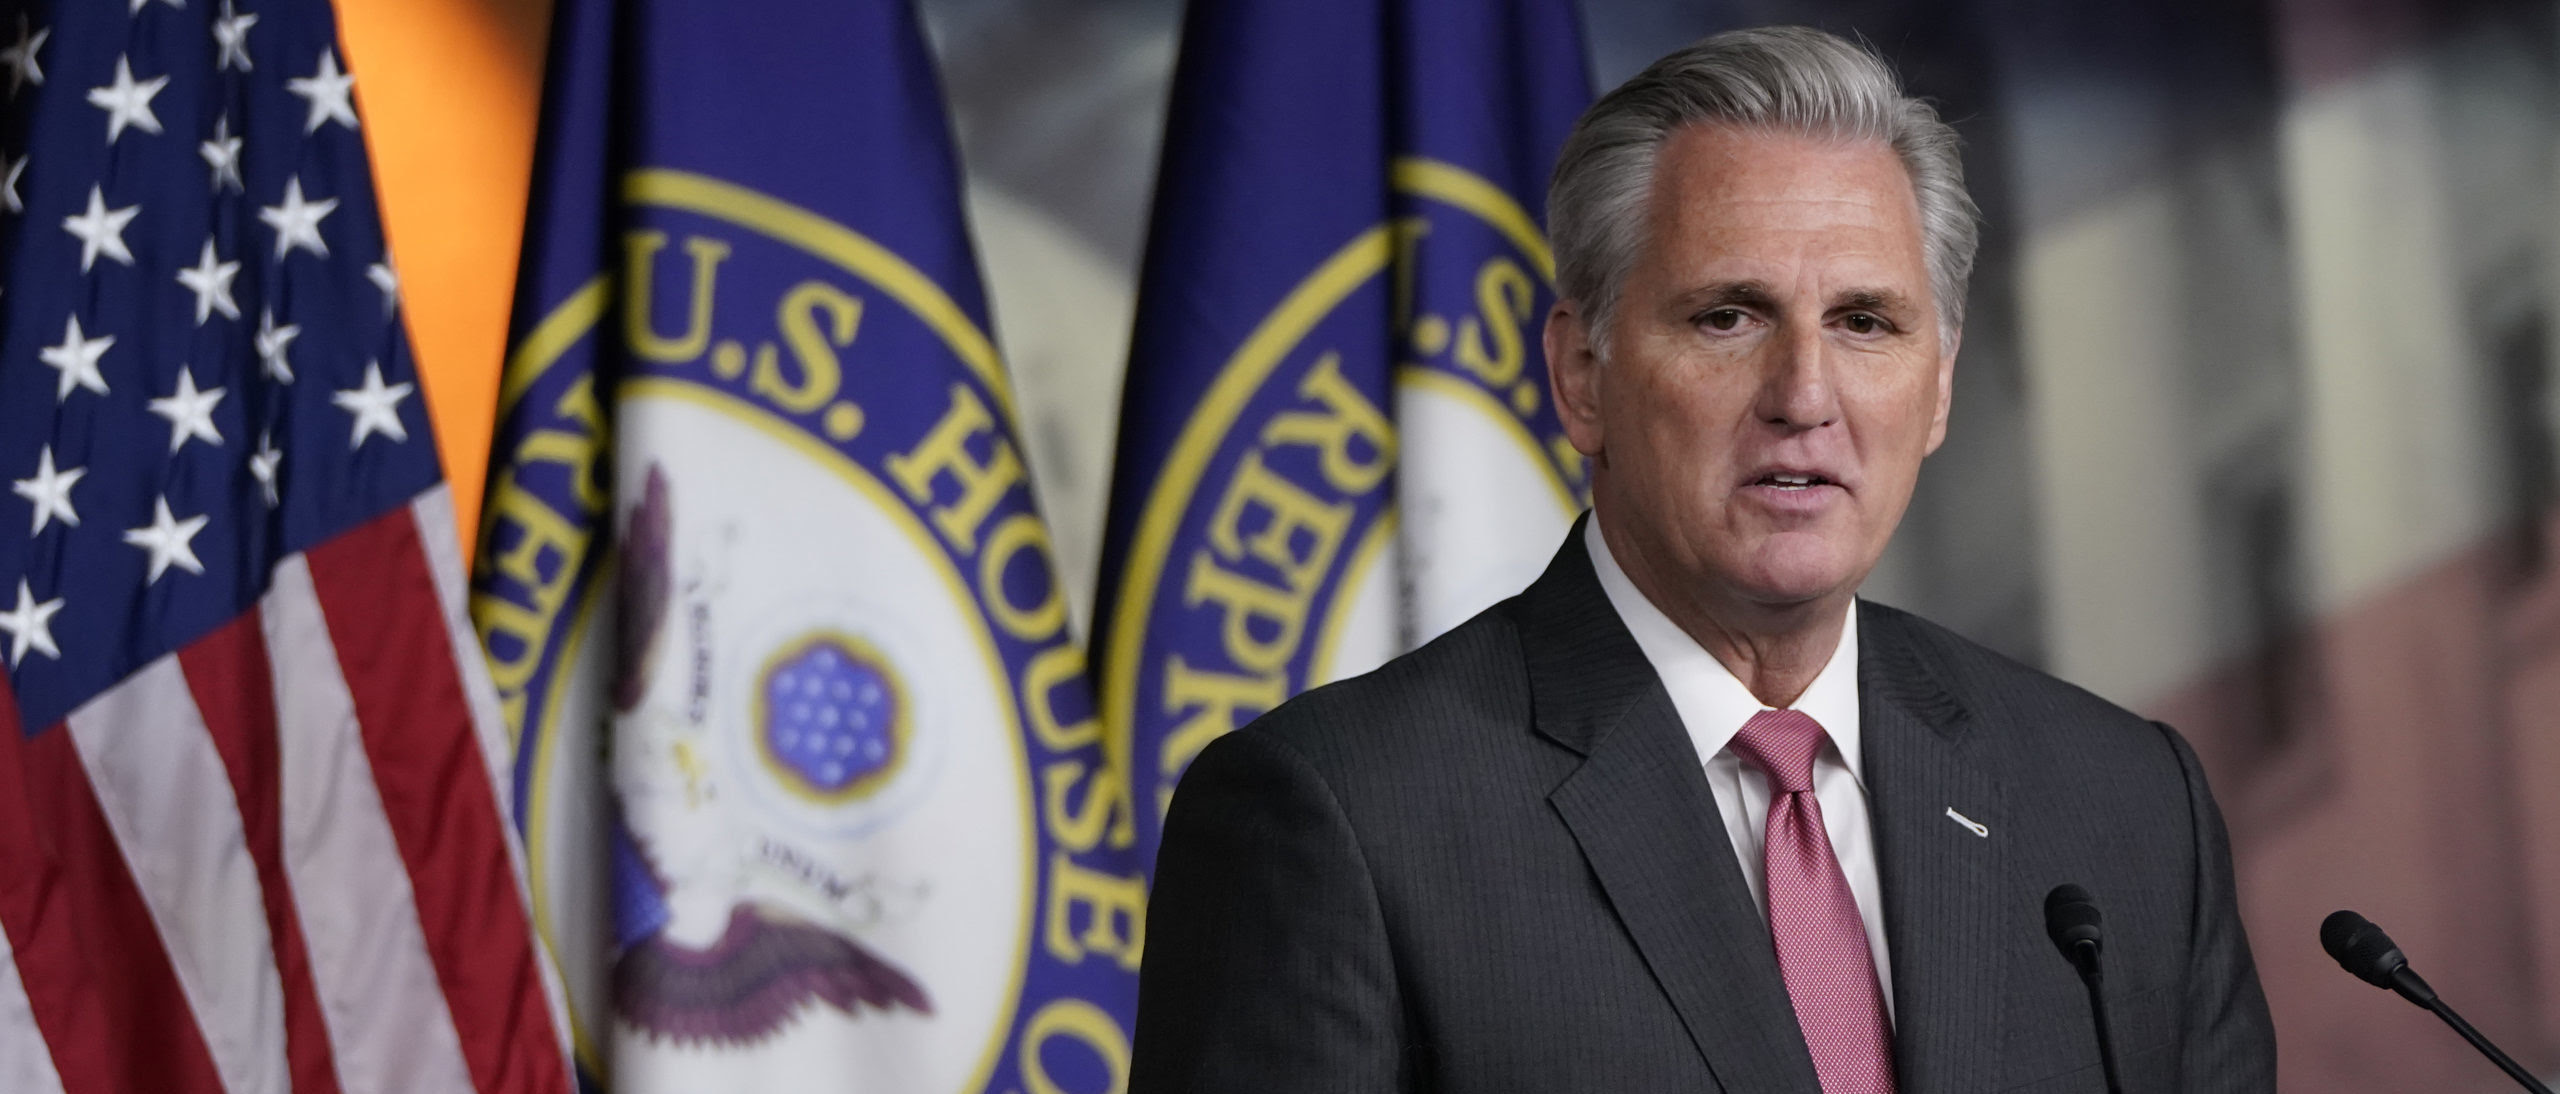 McCarthy Said He Would Encourage Trump To Resign After Capitol Riot, Audio Recording Reveals